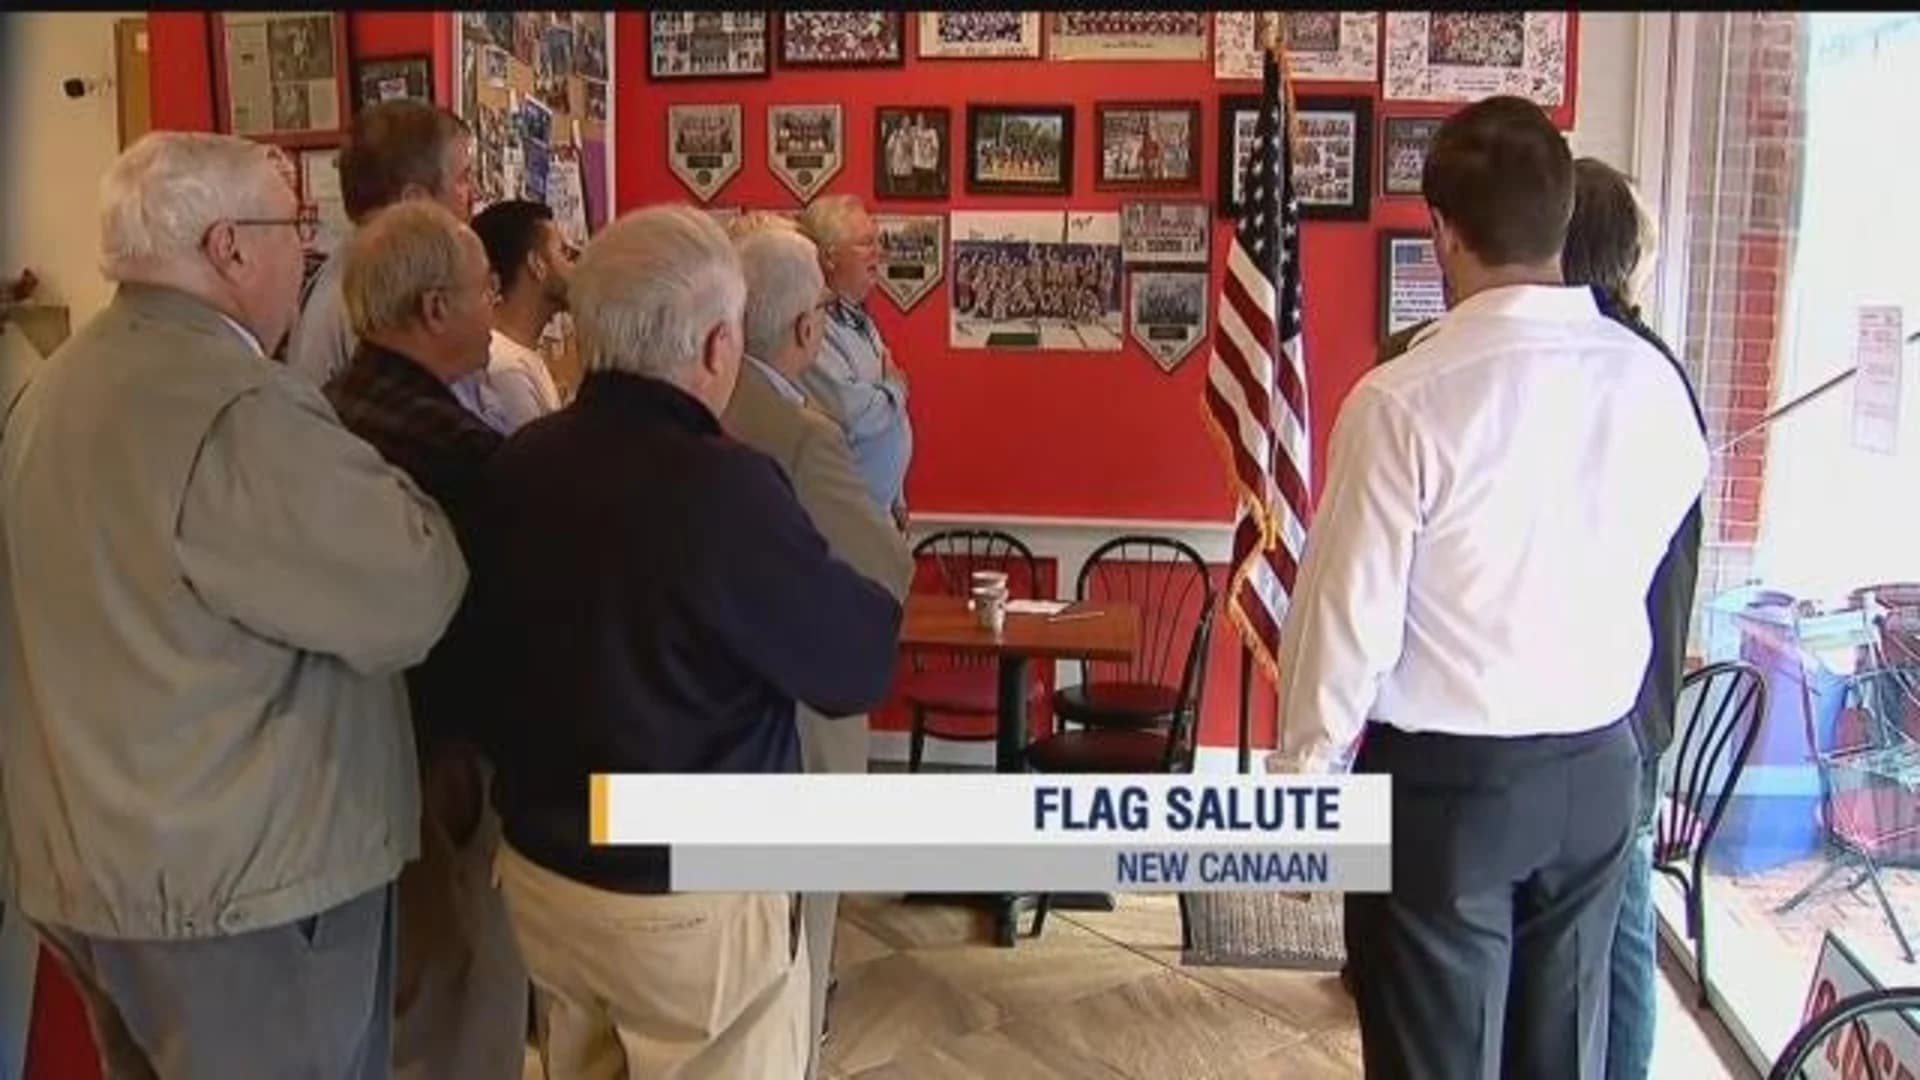 New Canaan group takes a stand for pledge of allegiance at deli